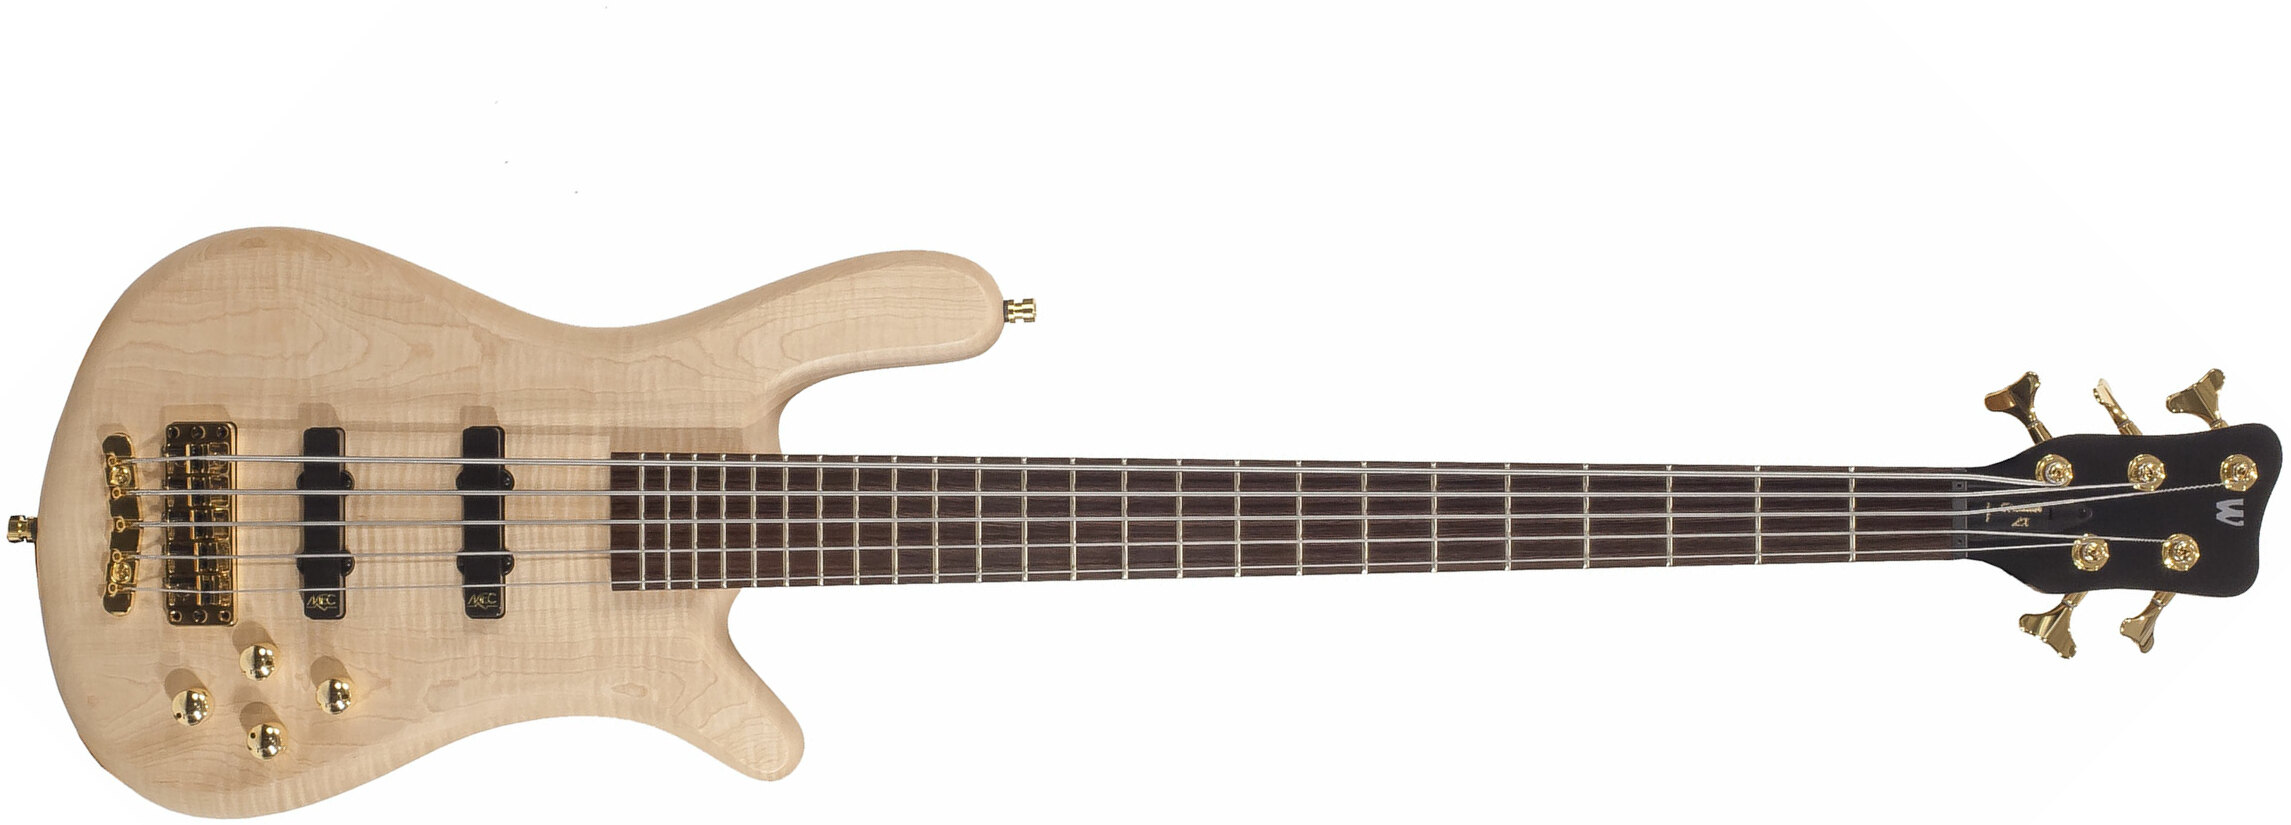 Warwick Streamer Lx 5 Gps Wen +housse - Natural Satin - Solid body electric bass - Main picture